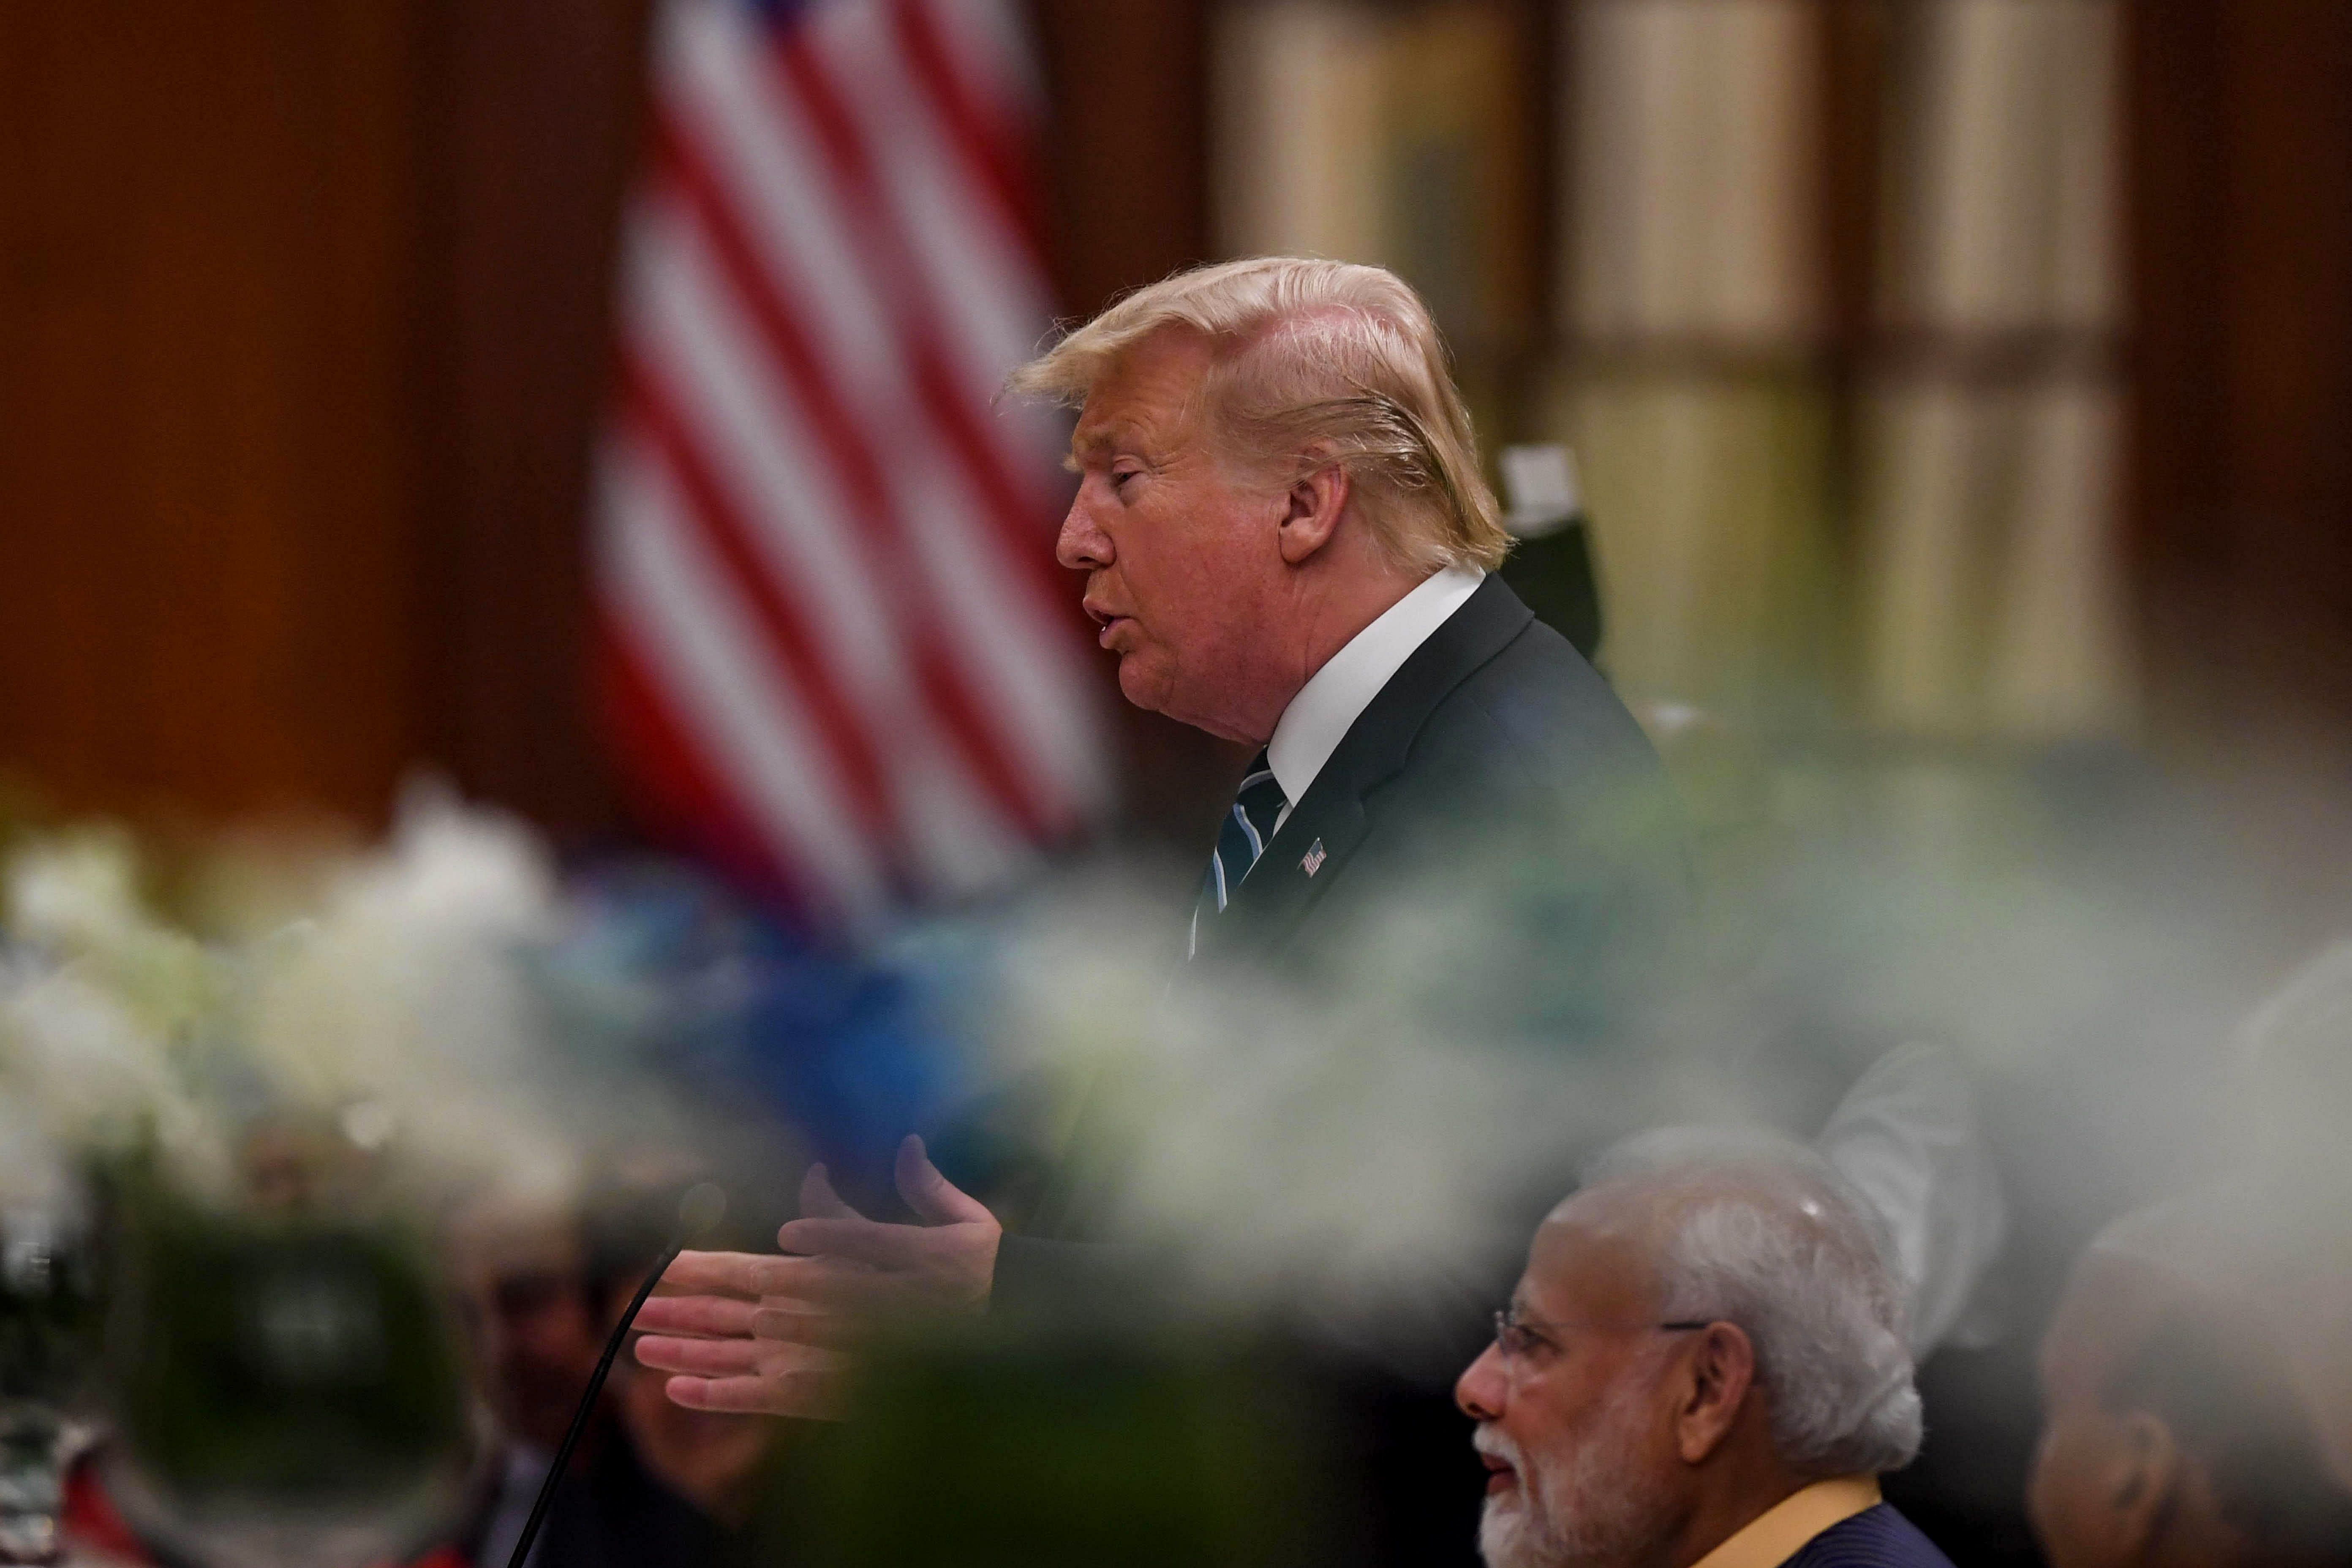 Trump, seeking re-election on Nov. 3, often refers to various news media outlets as "fake news" and has called elements of the U.S. news media "the enemy of the American people." (Credit: AFP Photo)